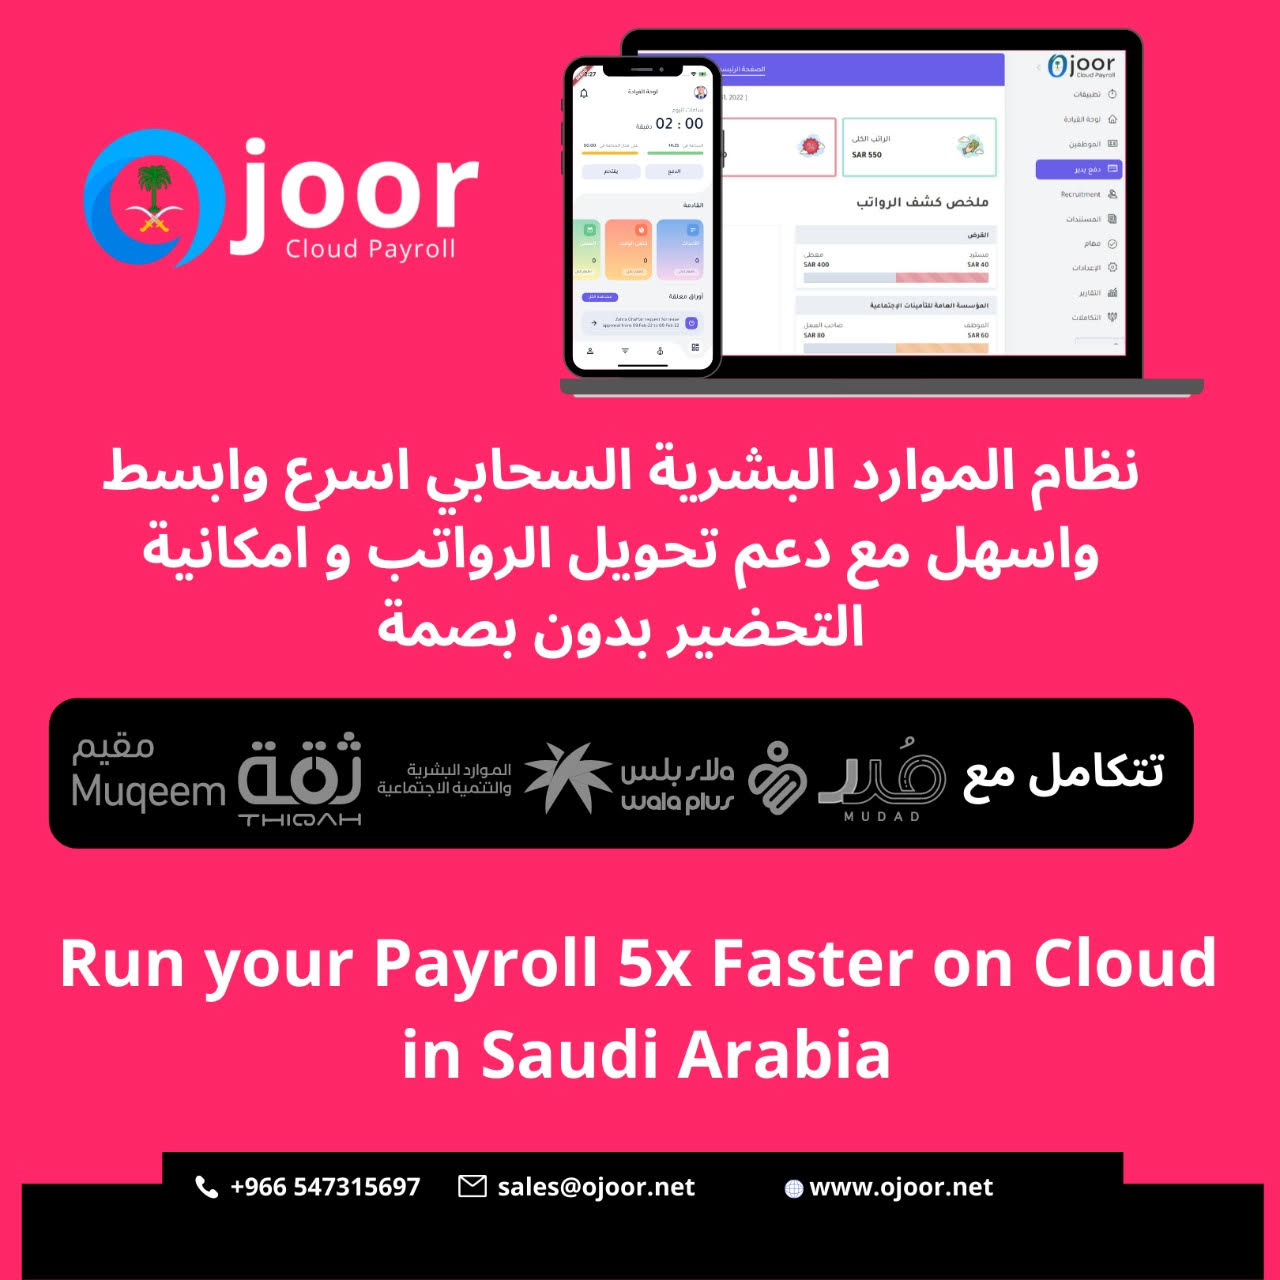  How does HR Software in Saudi Arabia assist with payroll?